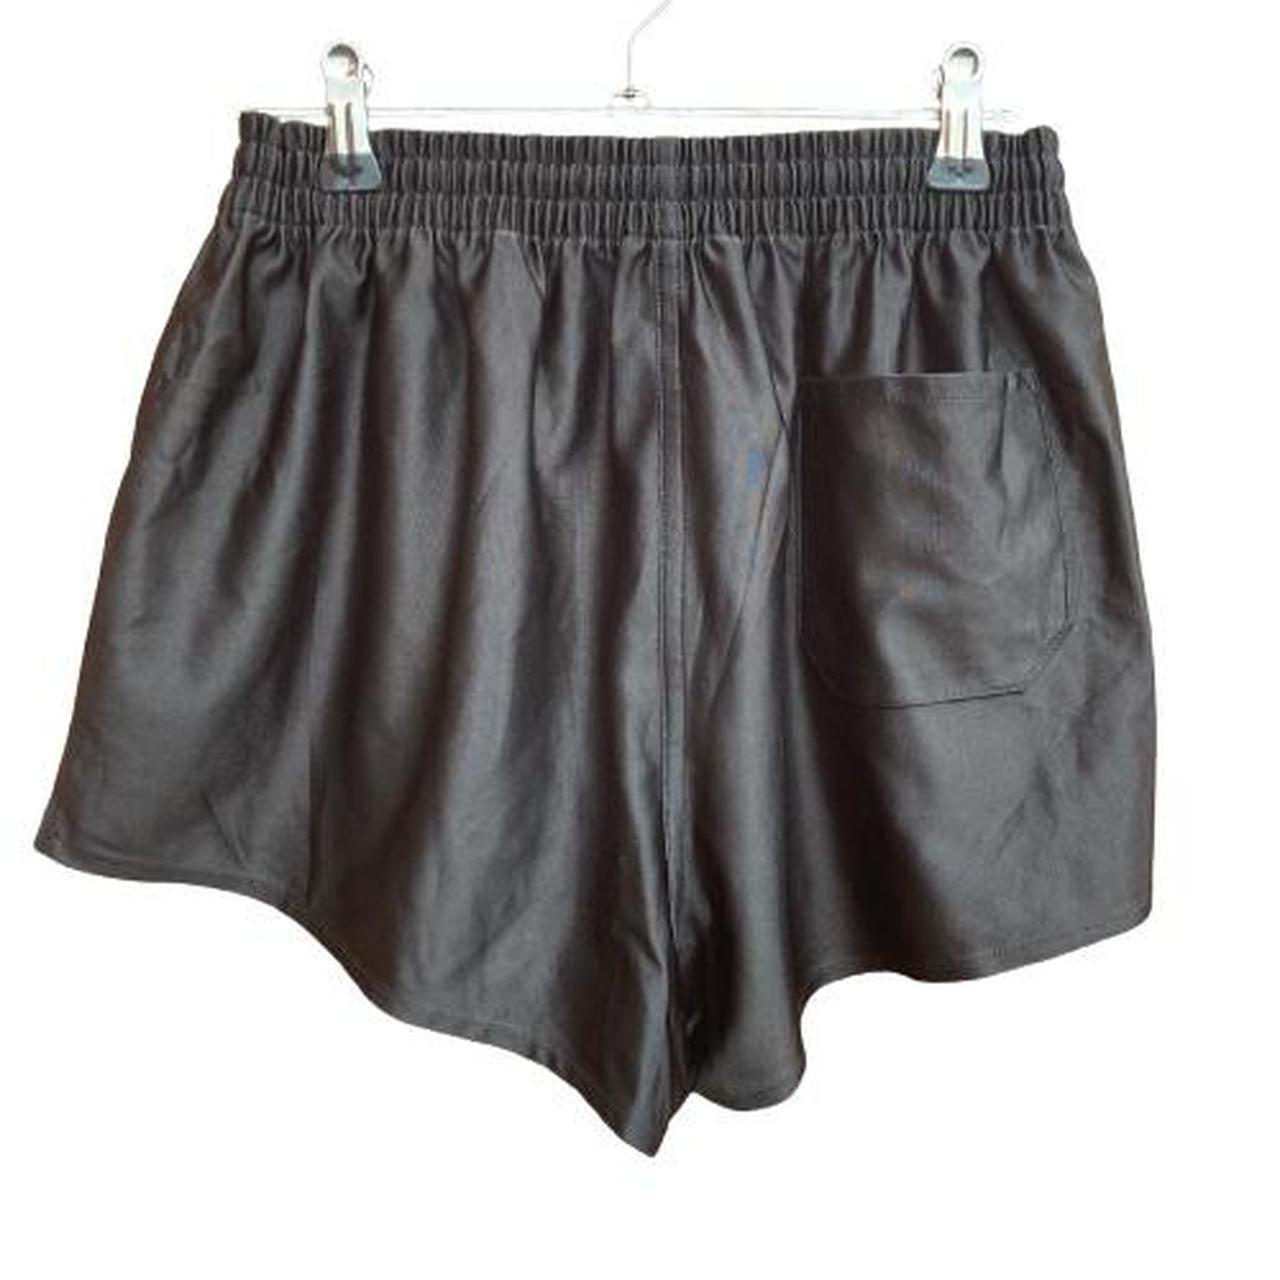 Product Image 4 - Vintage shorts in black by